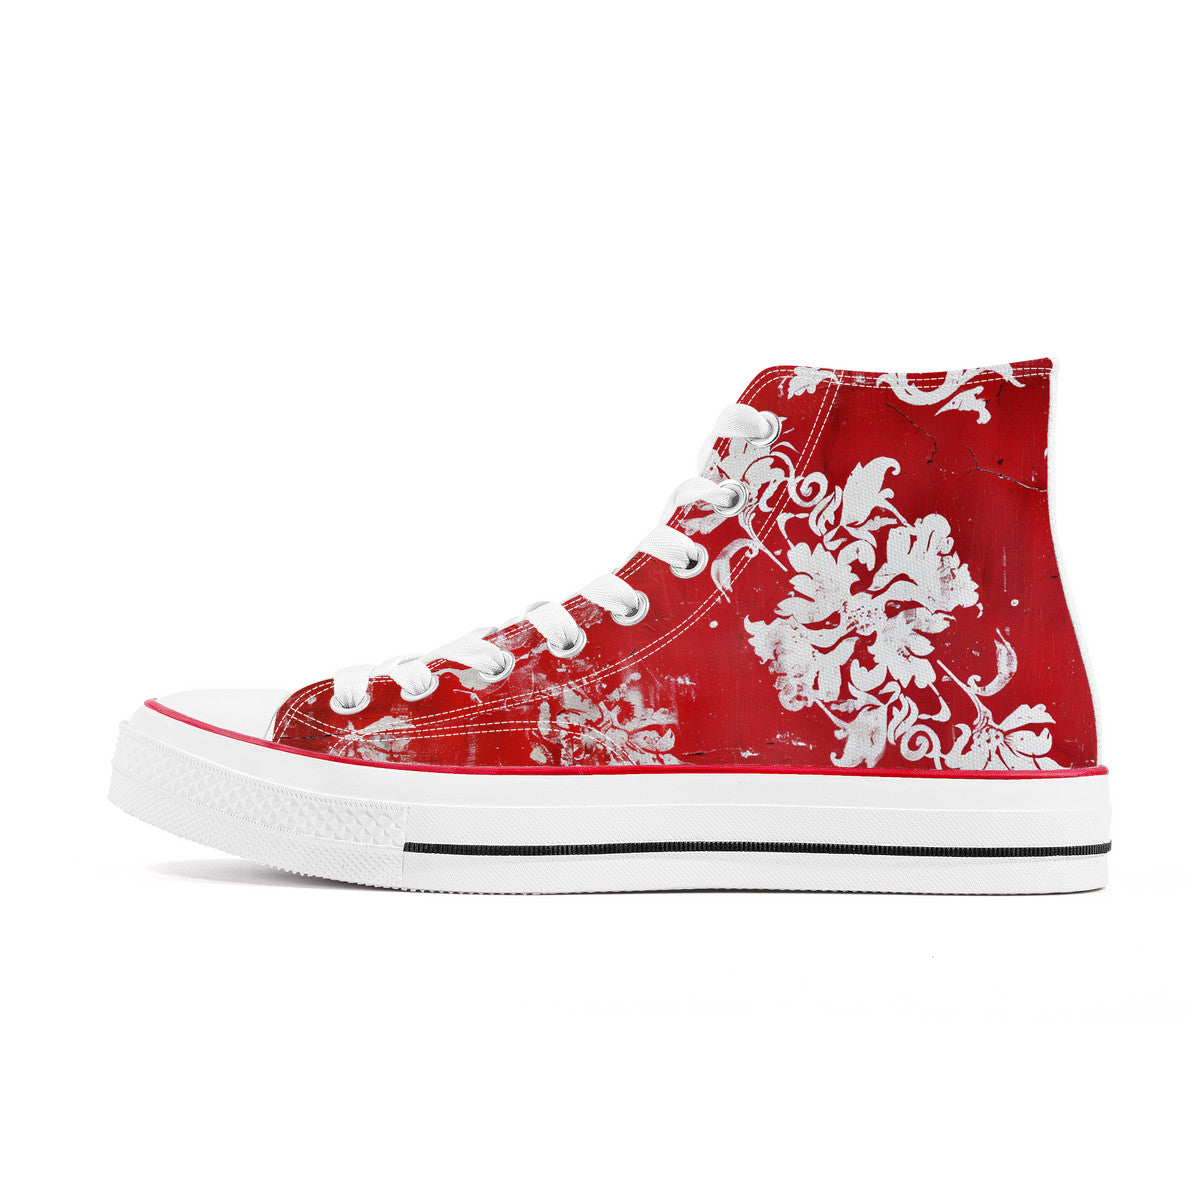 High Top Red Canvas Shoes - Vintage-style Tattoo Design.